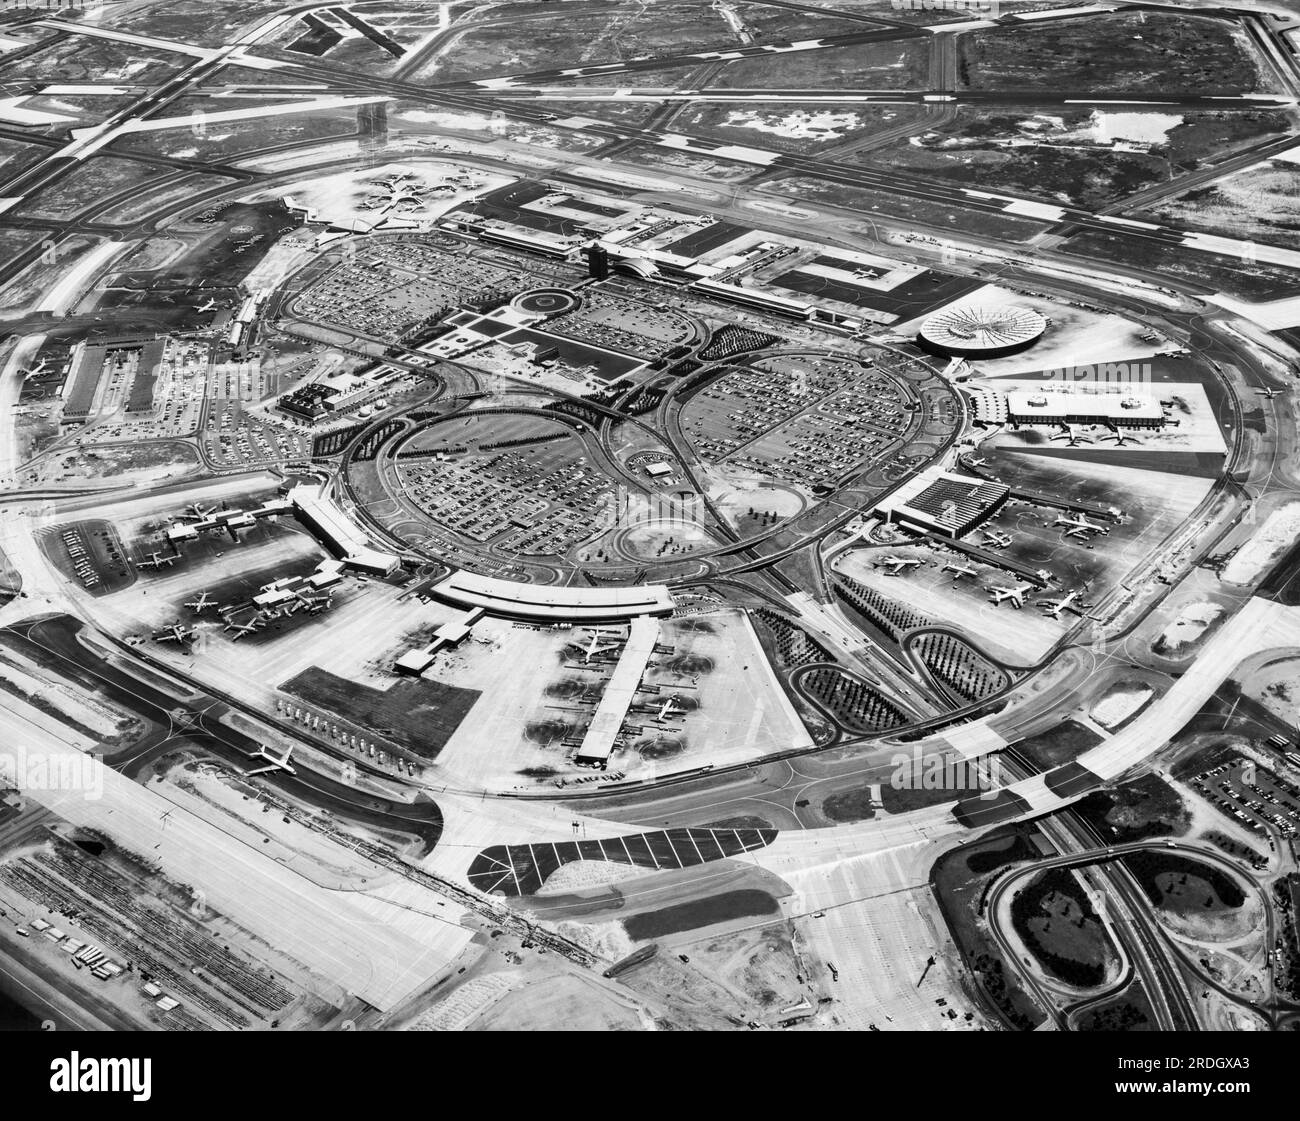 New York, New York:   June 11, 1964 An aerial view of John F. Kennedy International Airport in Queens. Stock Photo